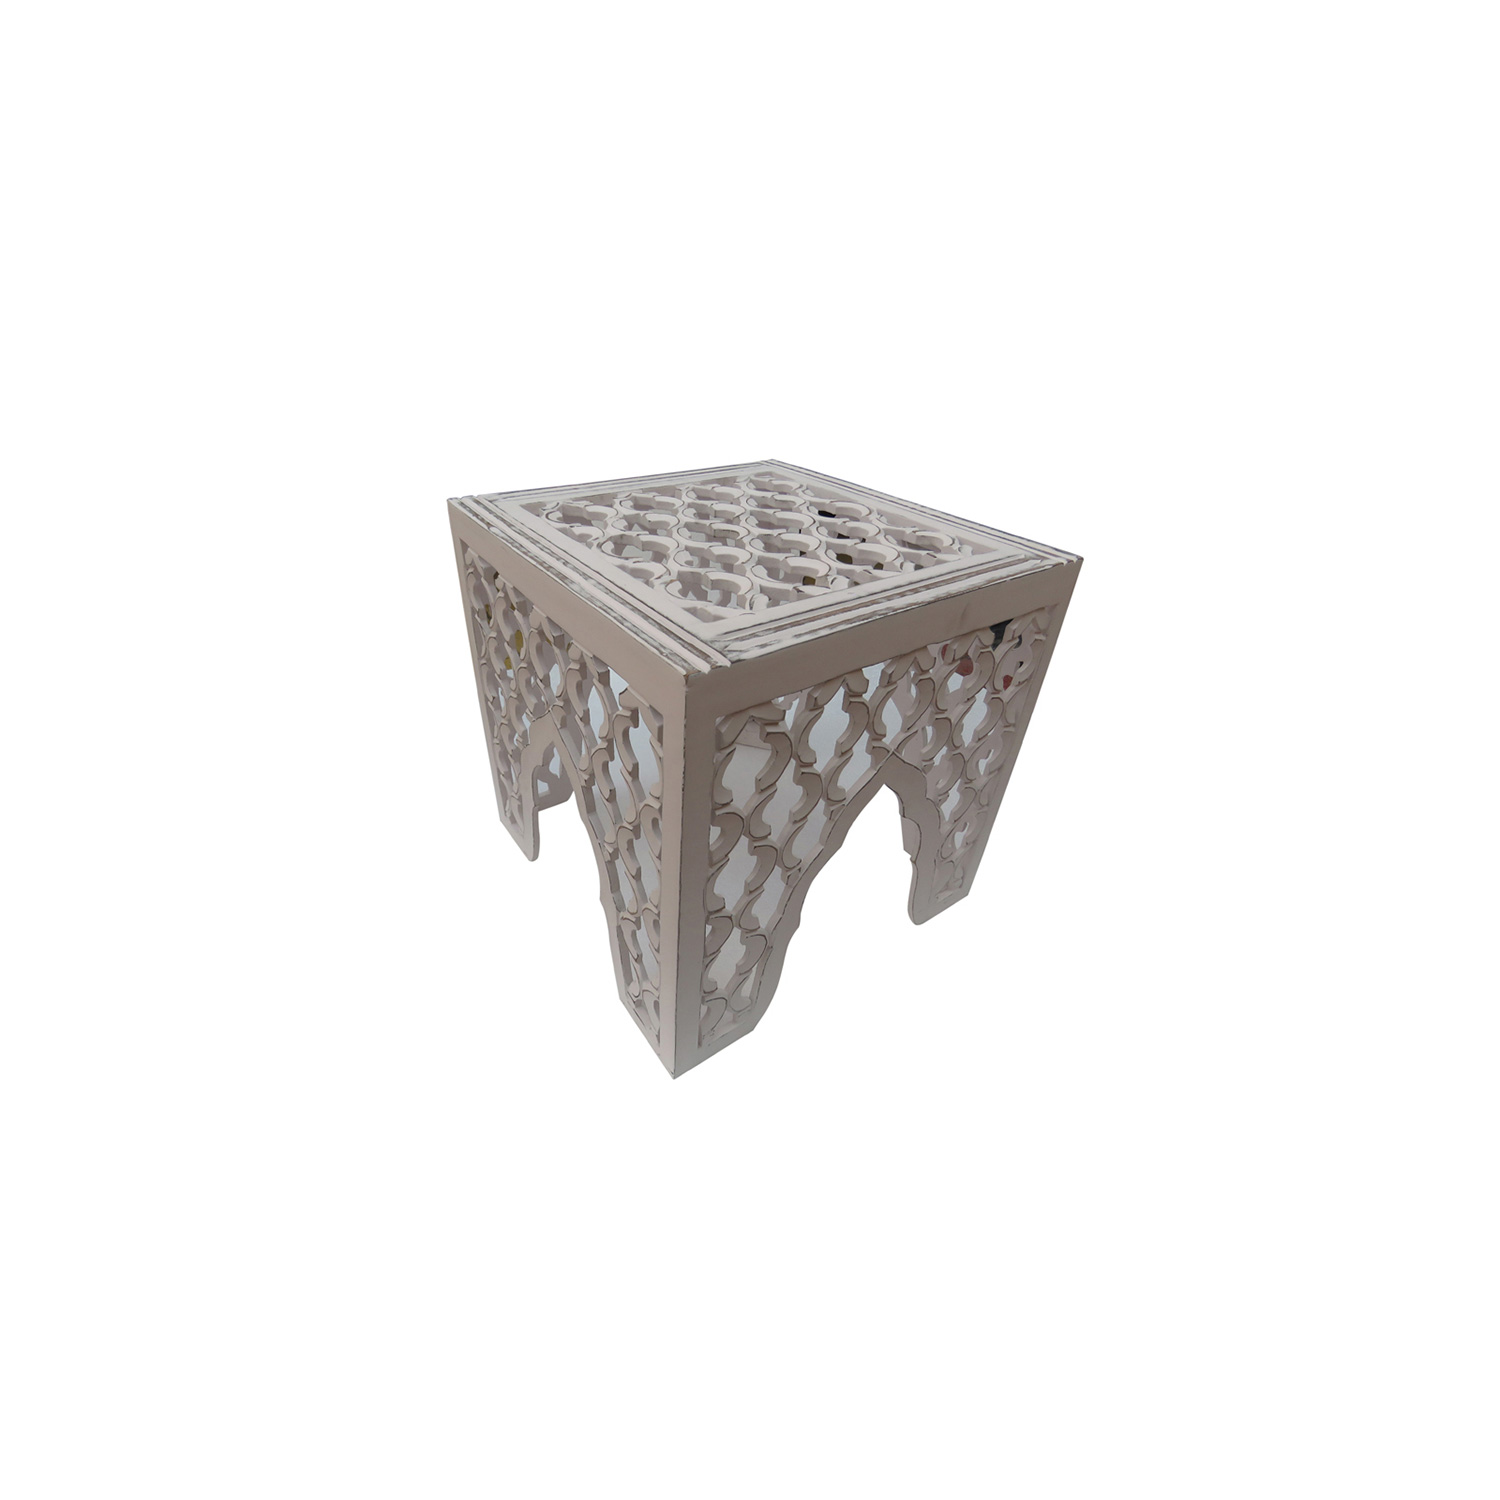 Ren-Wil Frost Accent Table - Distress White